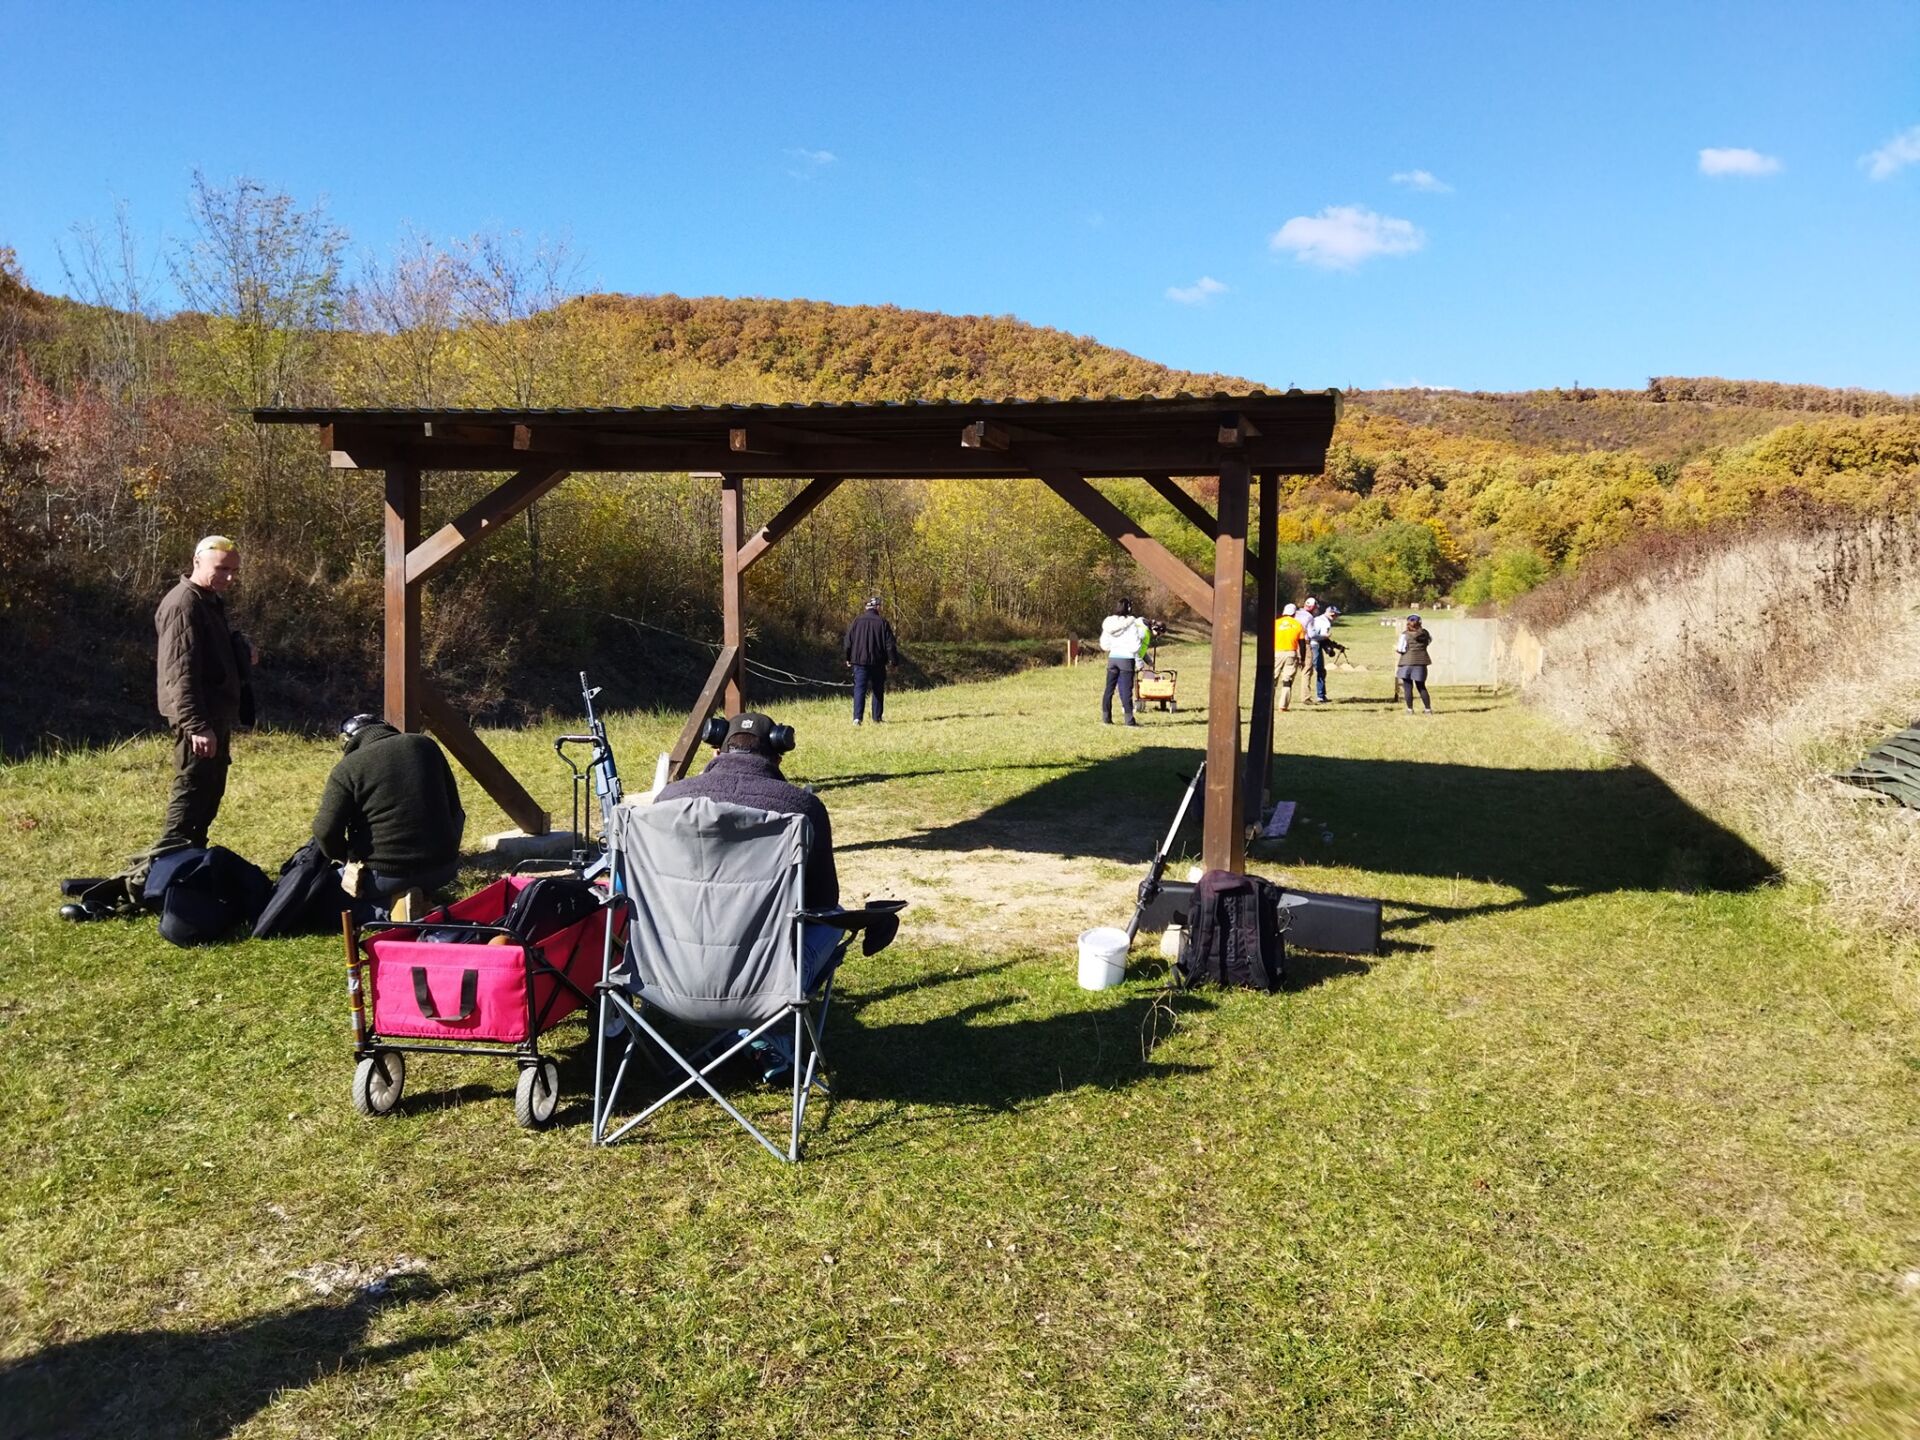 The outdoor area of the Celeritas Shooting Club